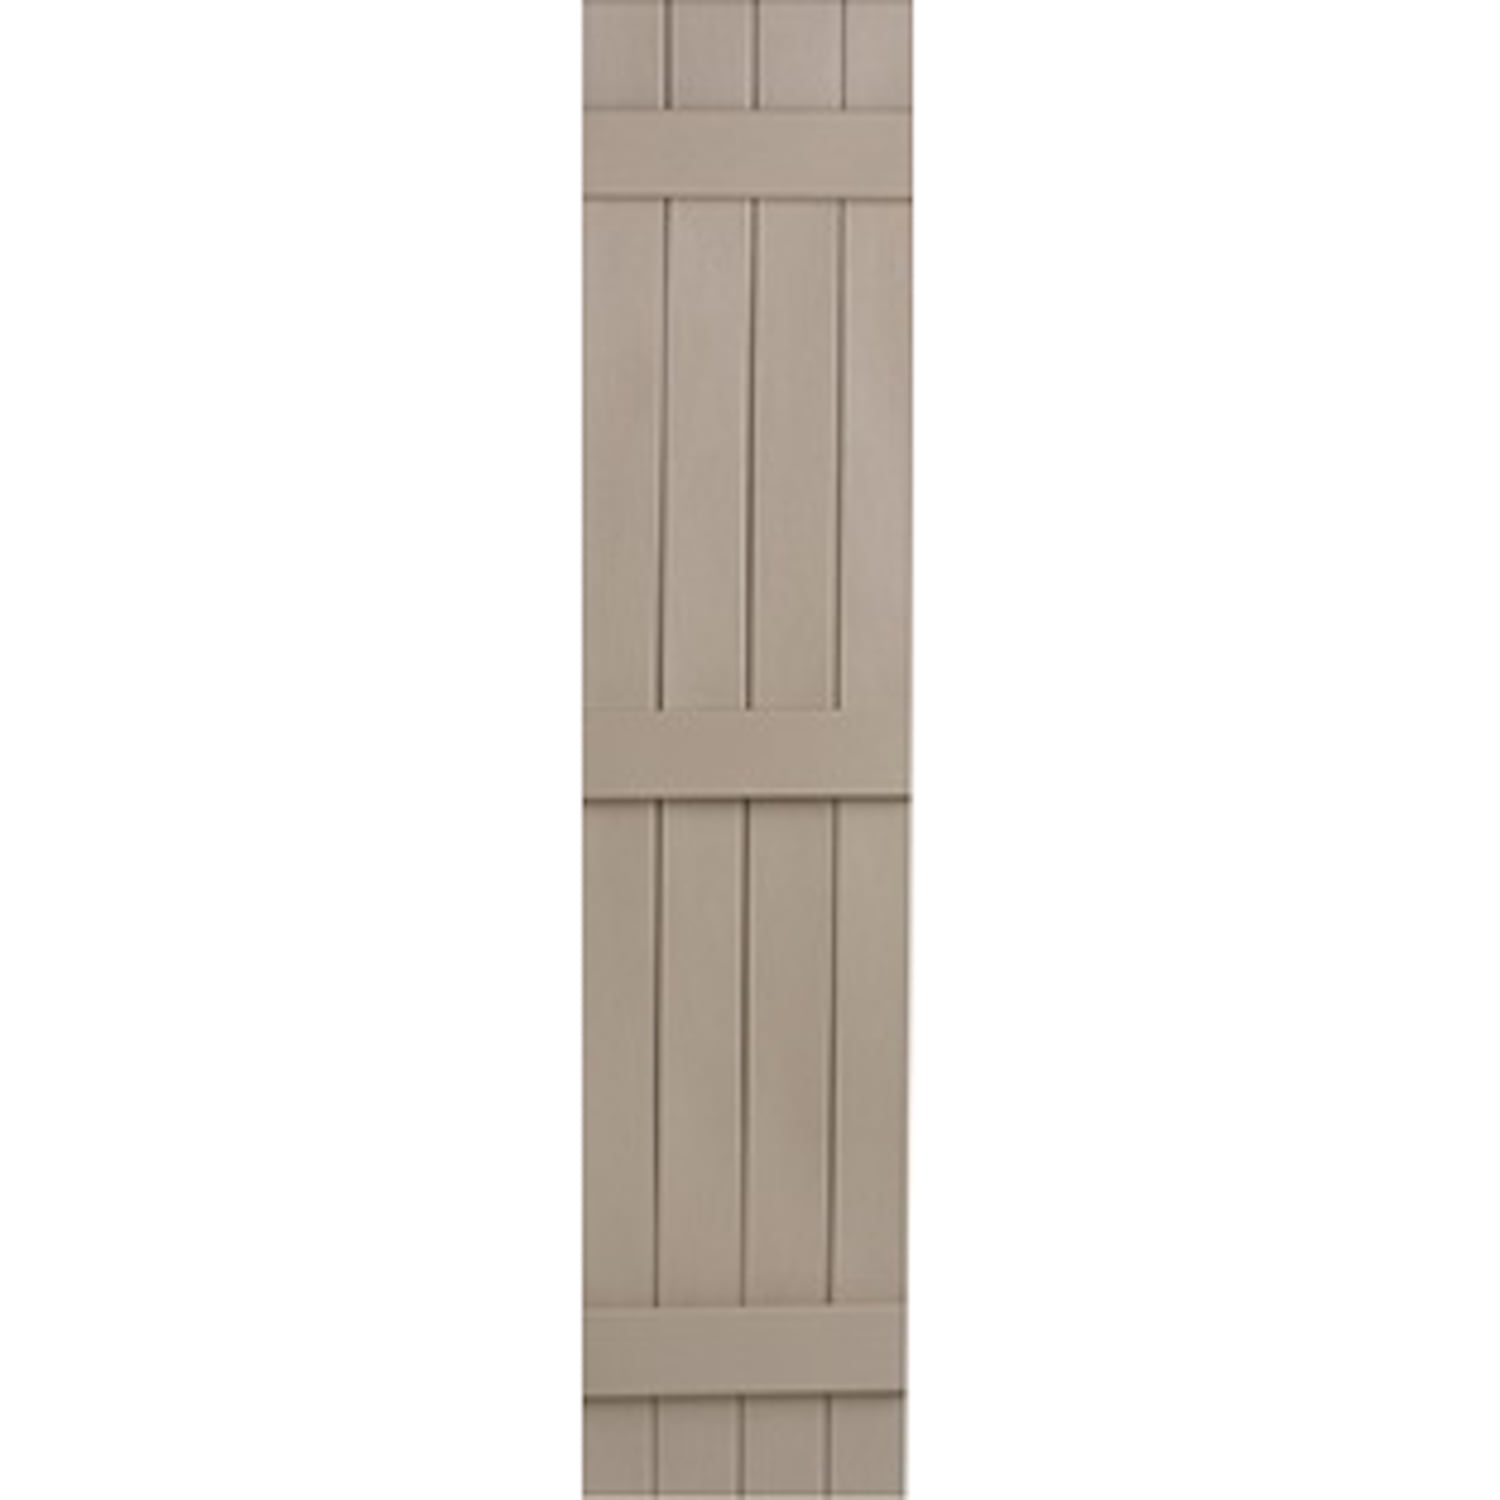 x 55in Homeside 4 Board and Batten Joined Shutter 1 Pair 14-1/2in 410 Gray